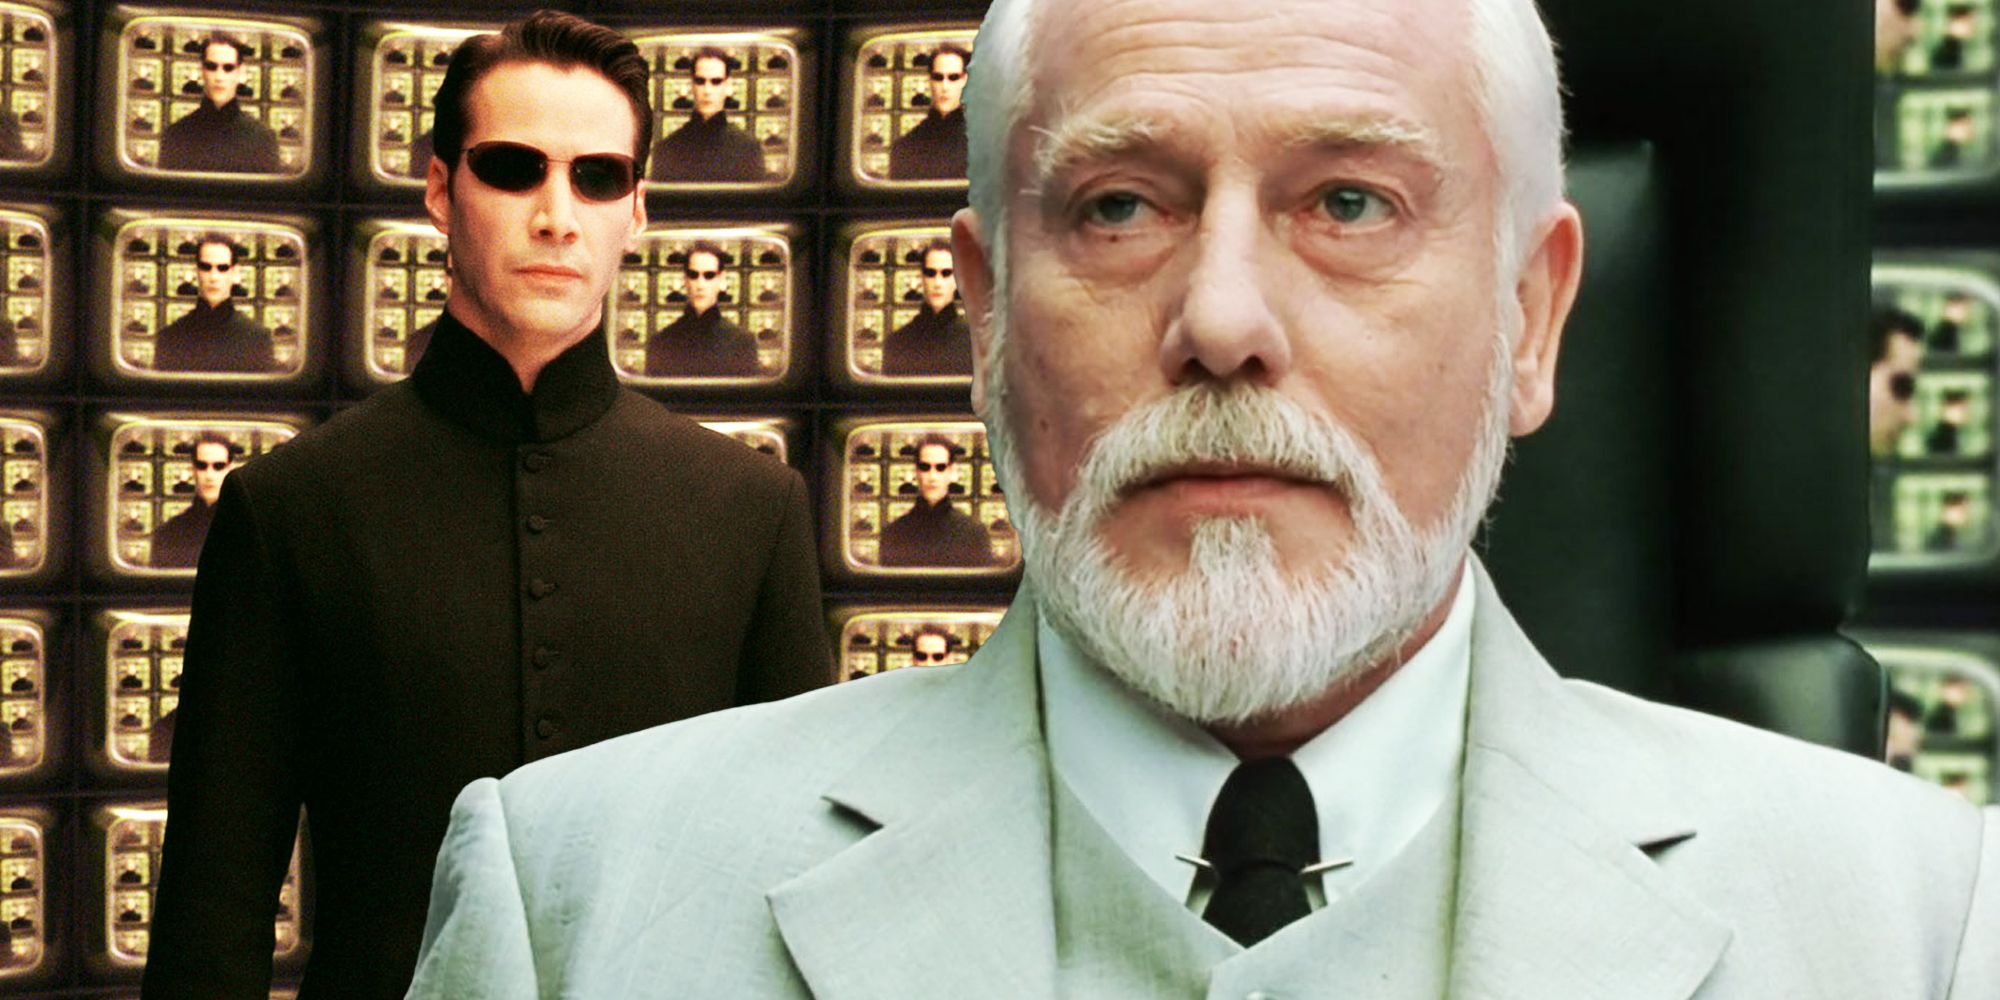 The Architect and Neo in The Matrix